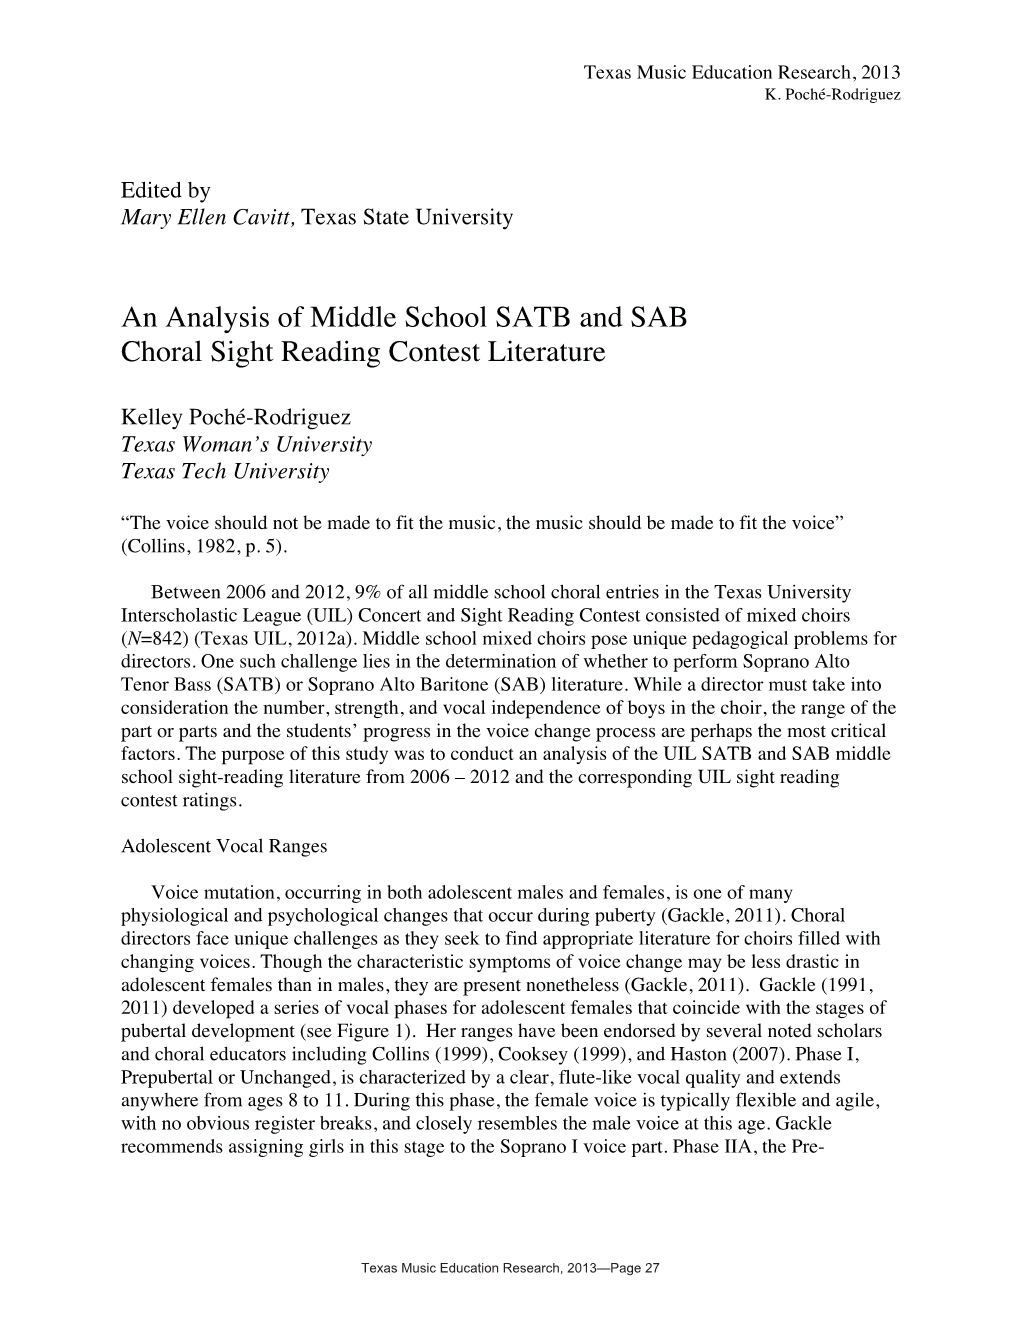 An Analysis of Middle School SATB and SAB Choral Sight Reading Contest Literature